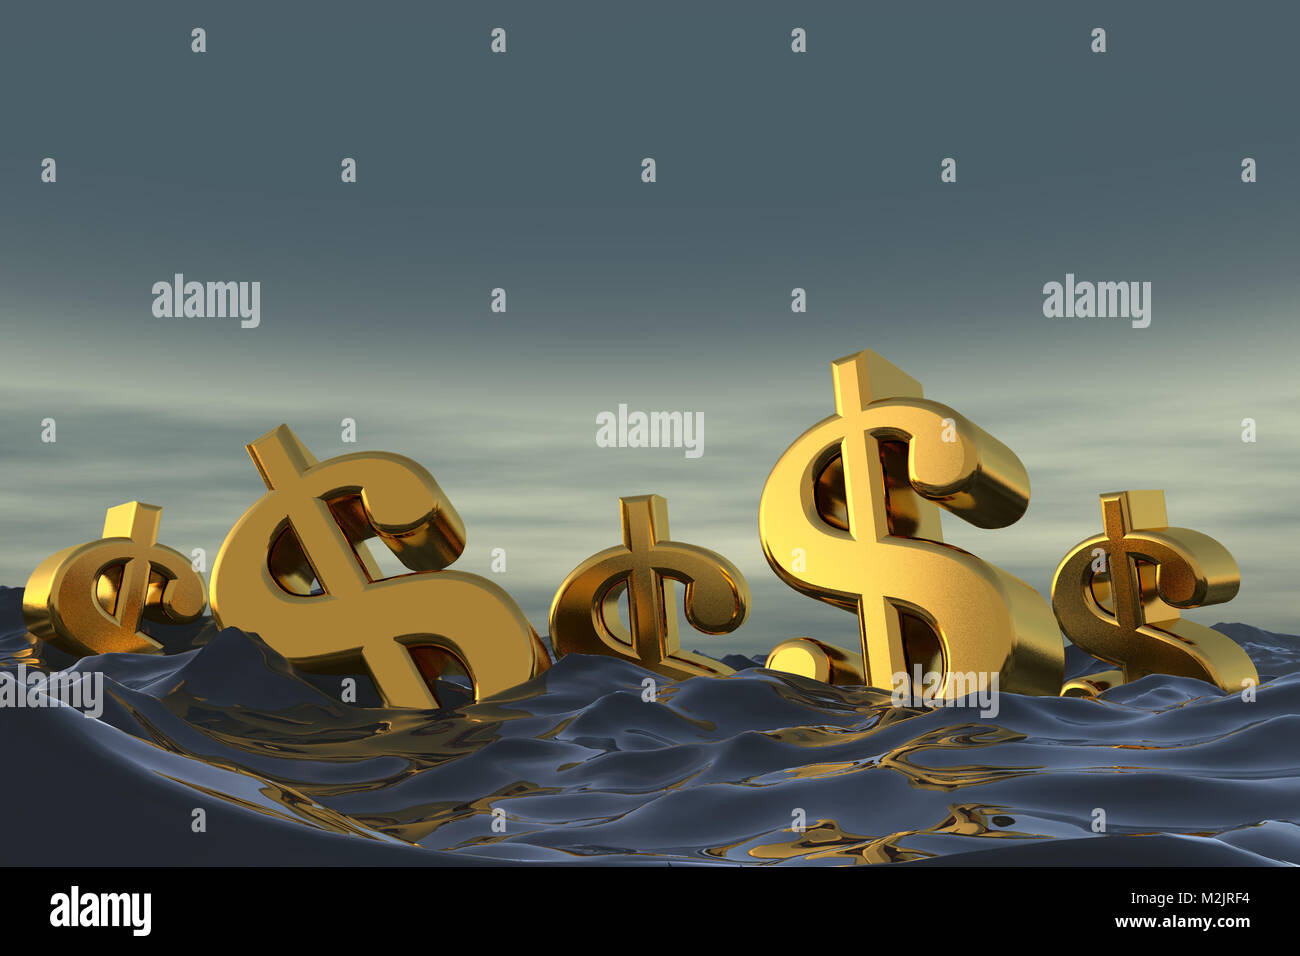 Dollar currency symbol at sea. Drowning in debt financial problem concept. 3D rendering Stock Photo